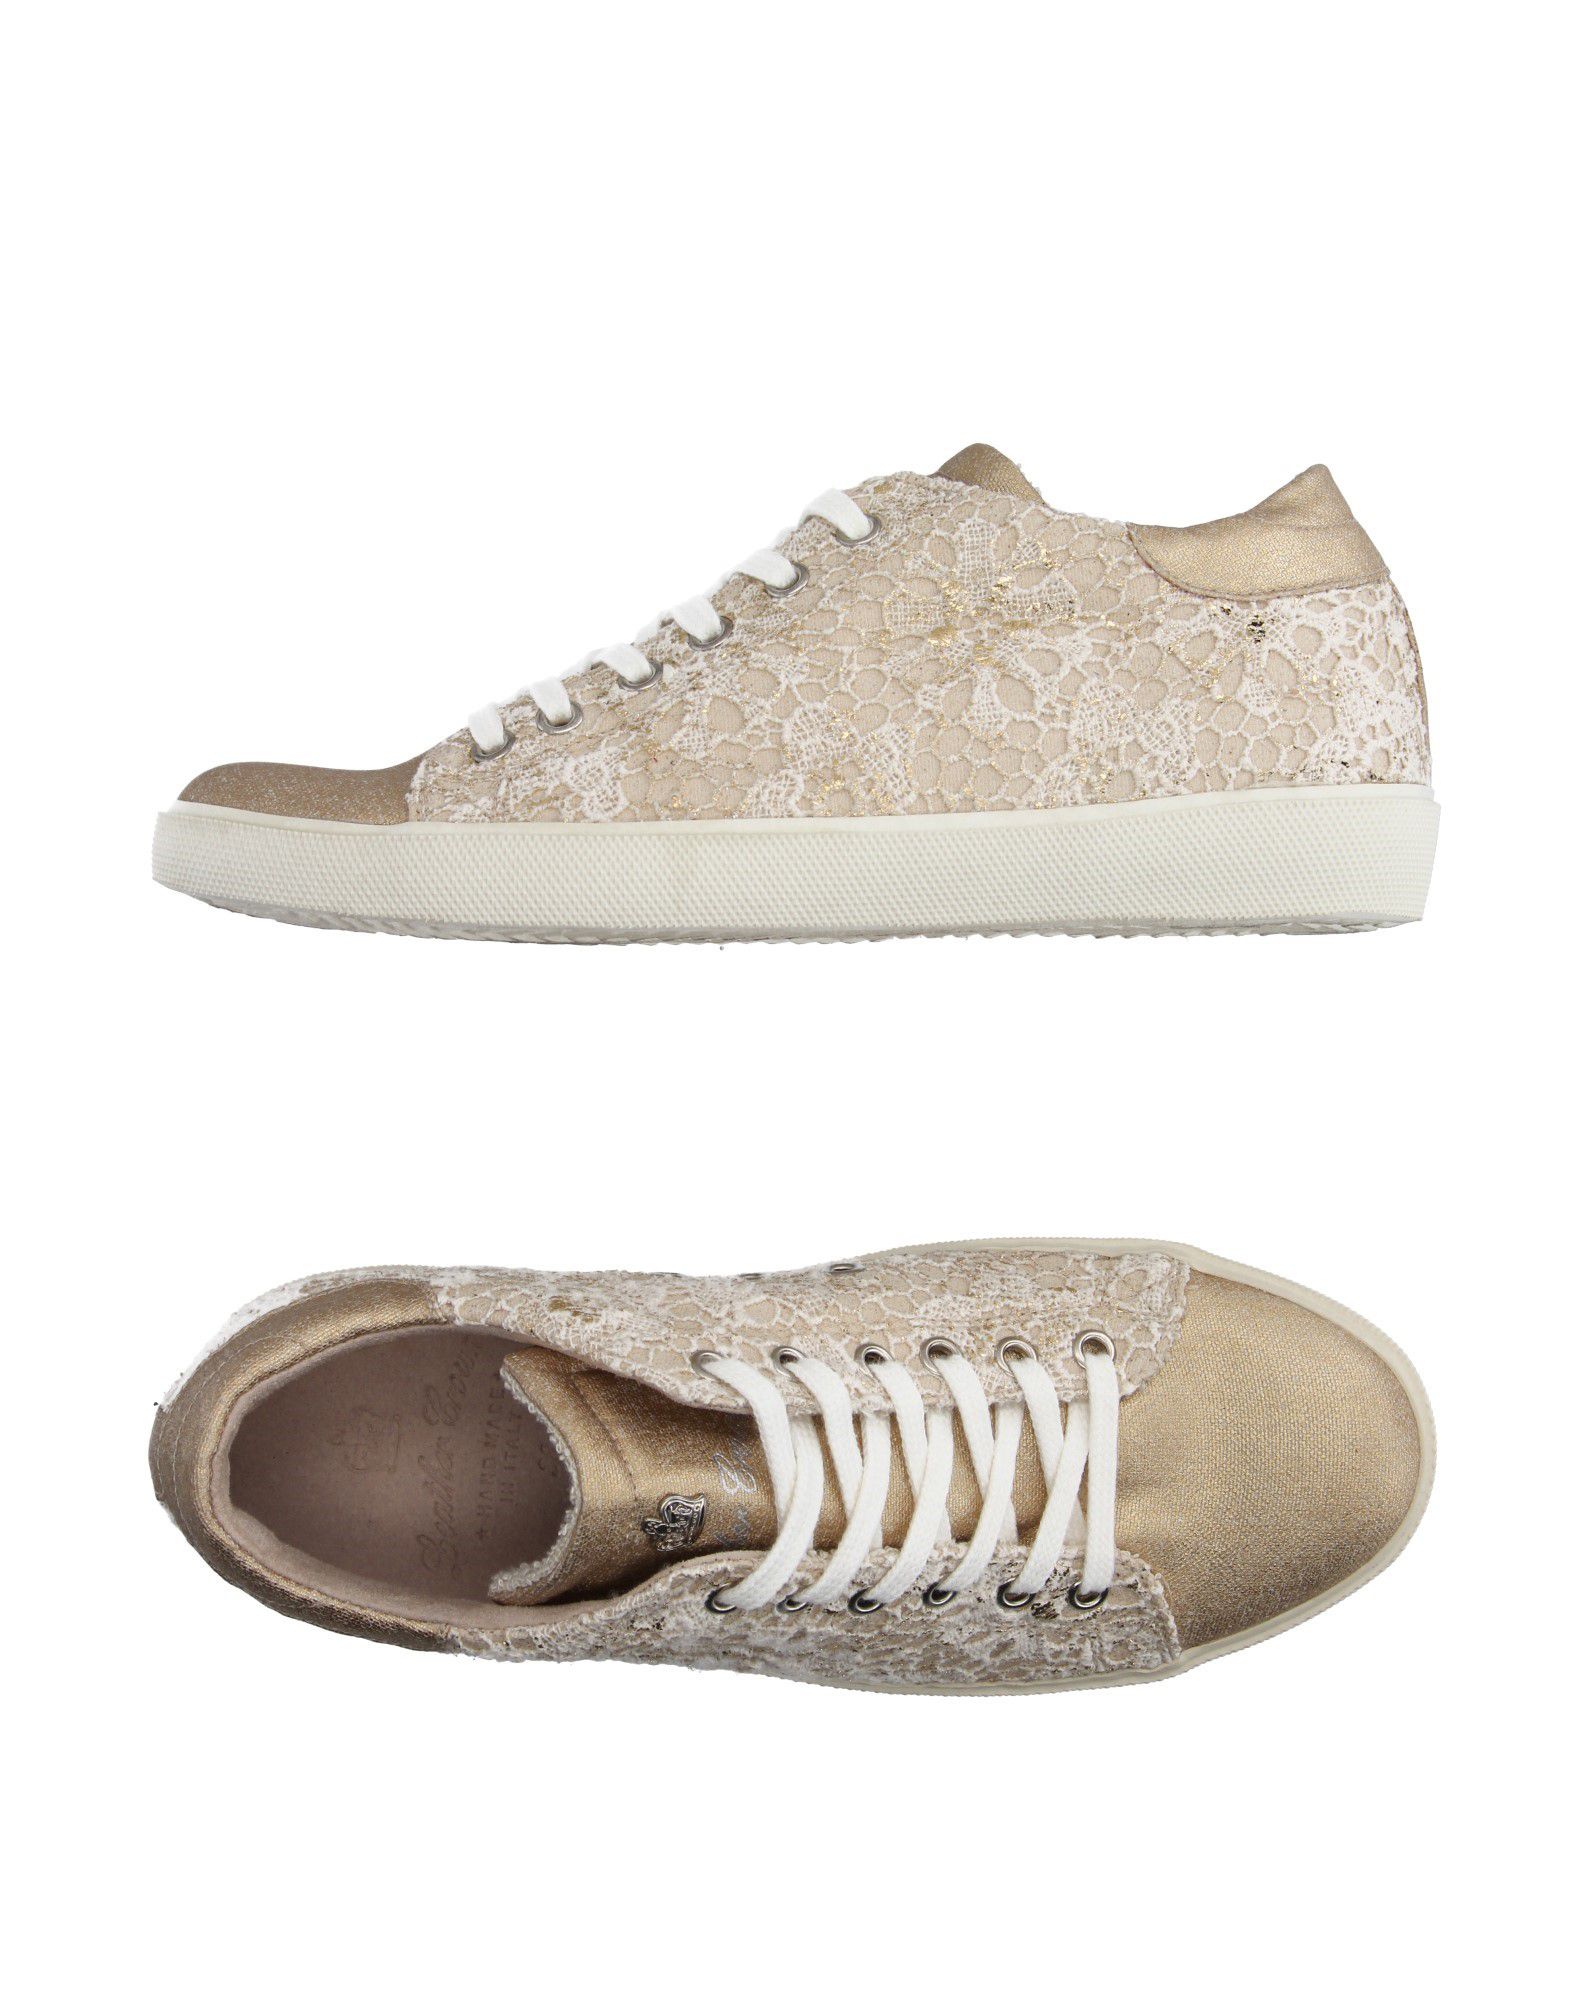 LEATHER CROWN Trainers,11139196XV 13